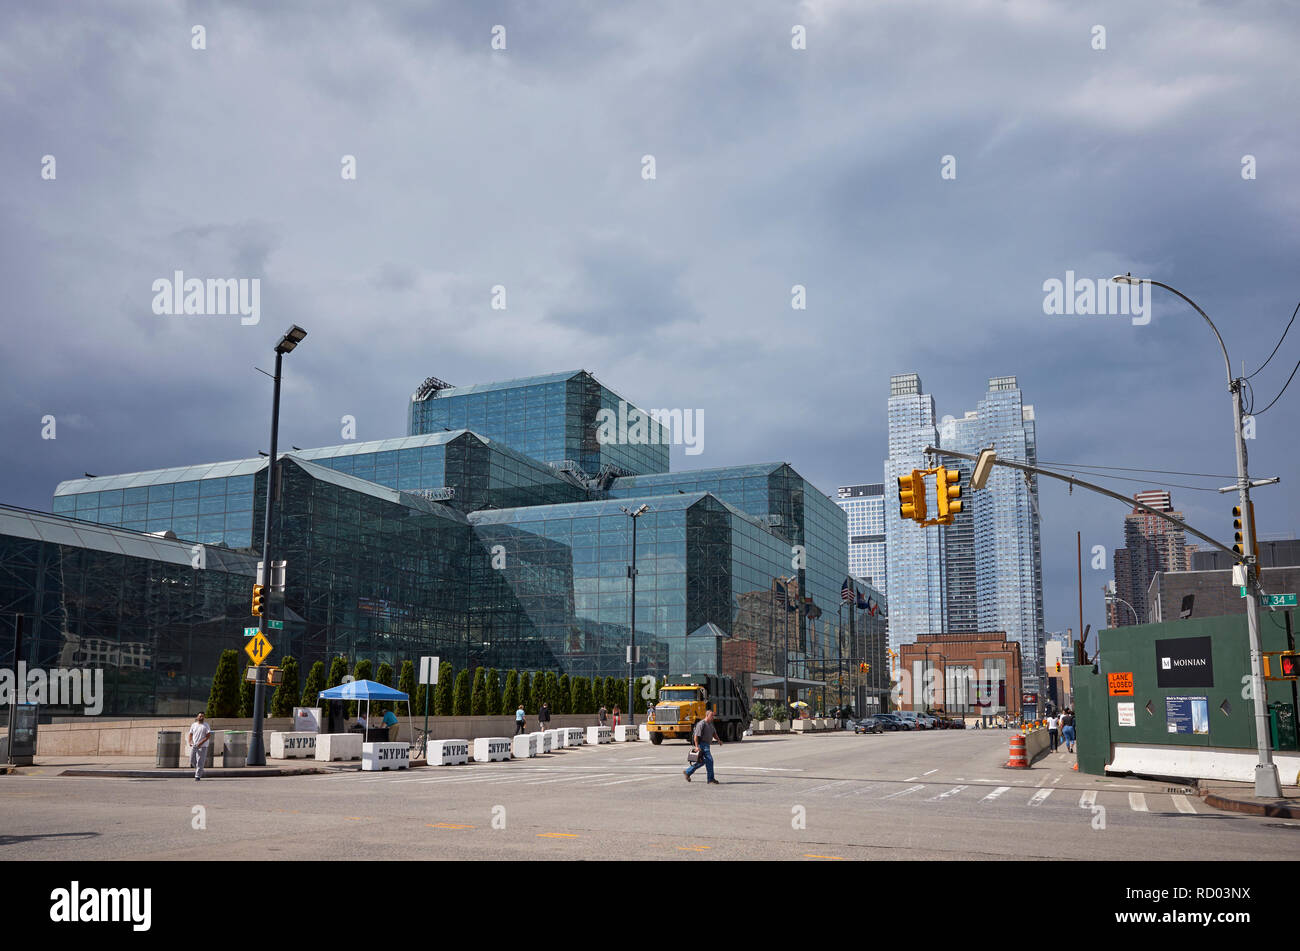 New York, USA - June 28, 2018: Pedestrian crosses intersection at the Jacob K. Javits Convention Center, commonly known as the Javits Center. Stock Photo